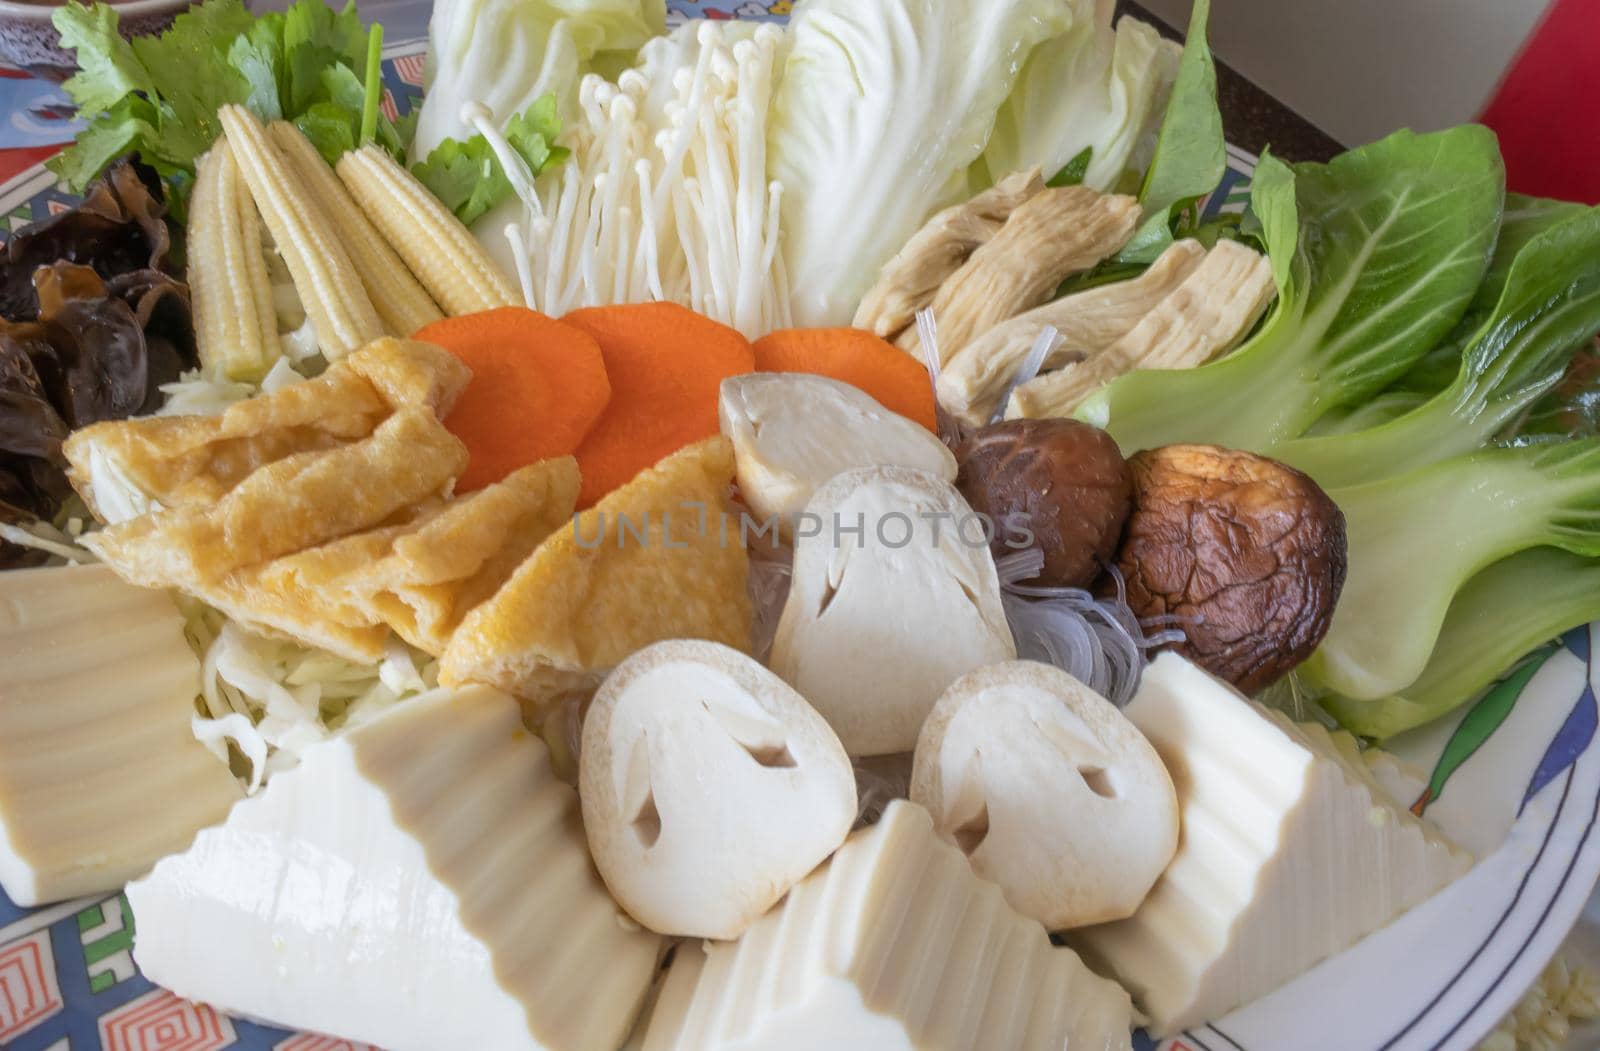 fresh vegetables by suththisumdeang